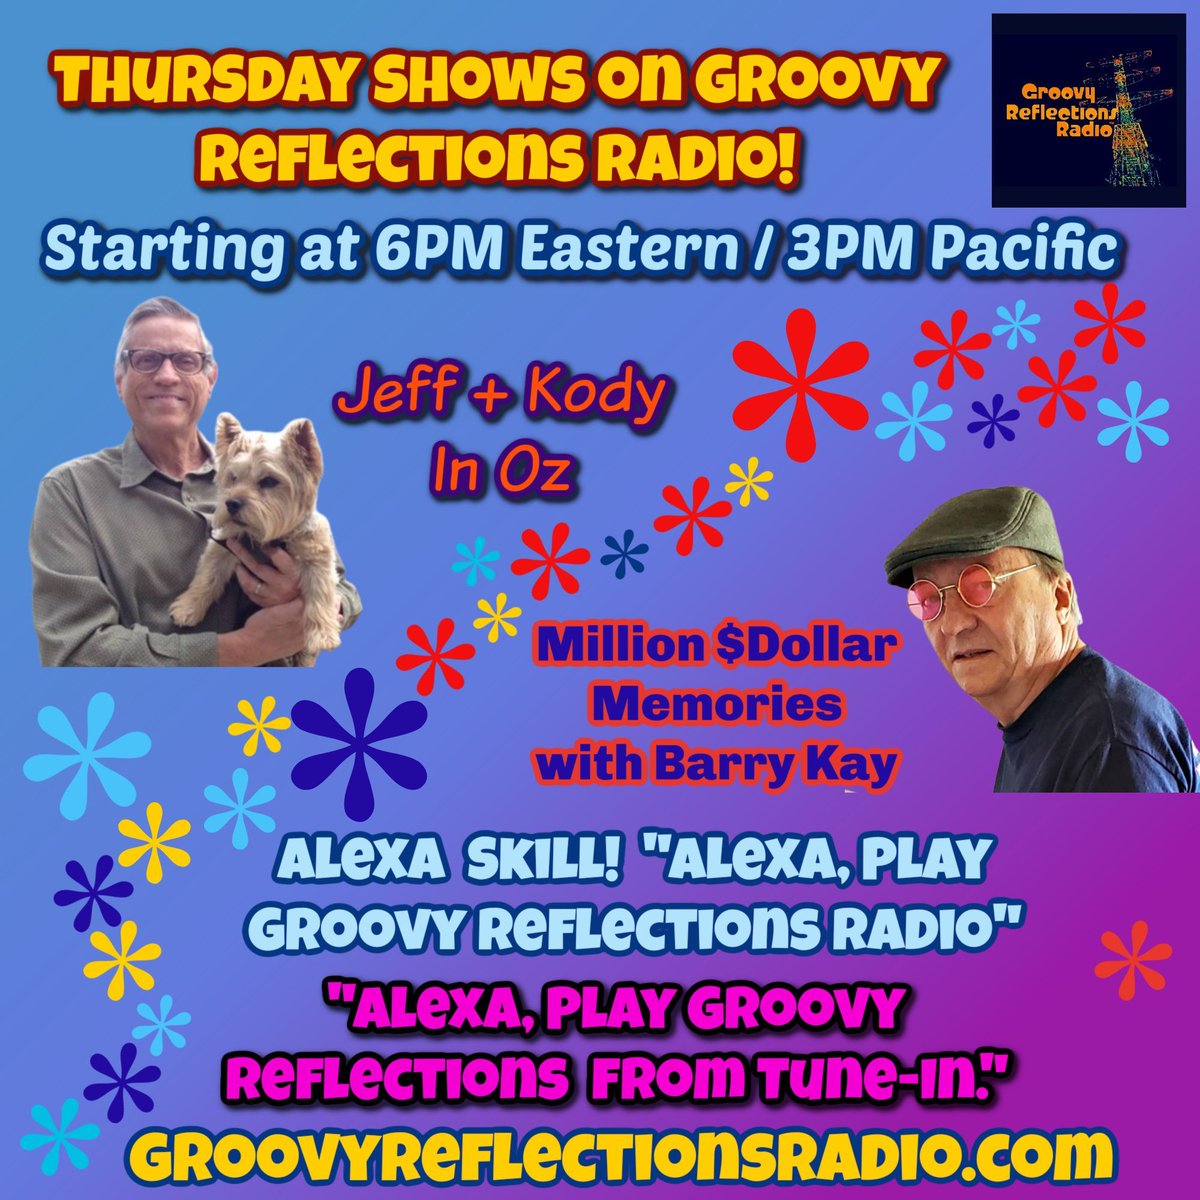 Thursday starting at 6pm Eastern / 3 Pacific, catch two of our shows, back-to-back: Million $ Memories with Barry Kay, and In Oz with Jeff & Kody only on buff.ly/4aPTW5k.